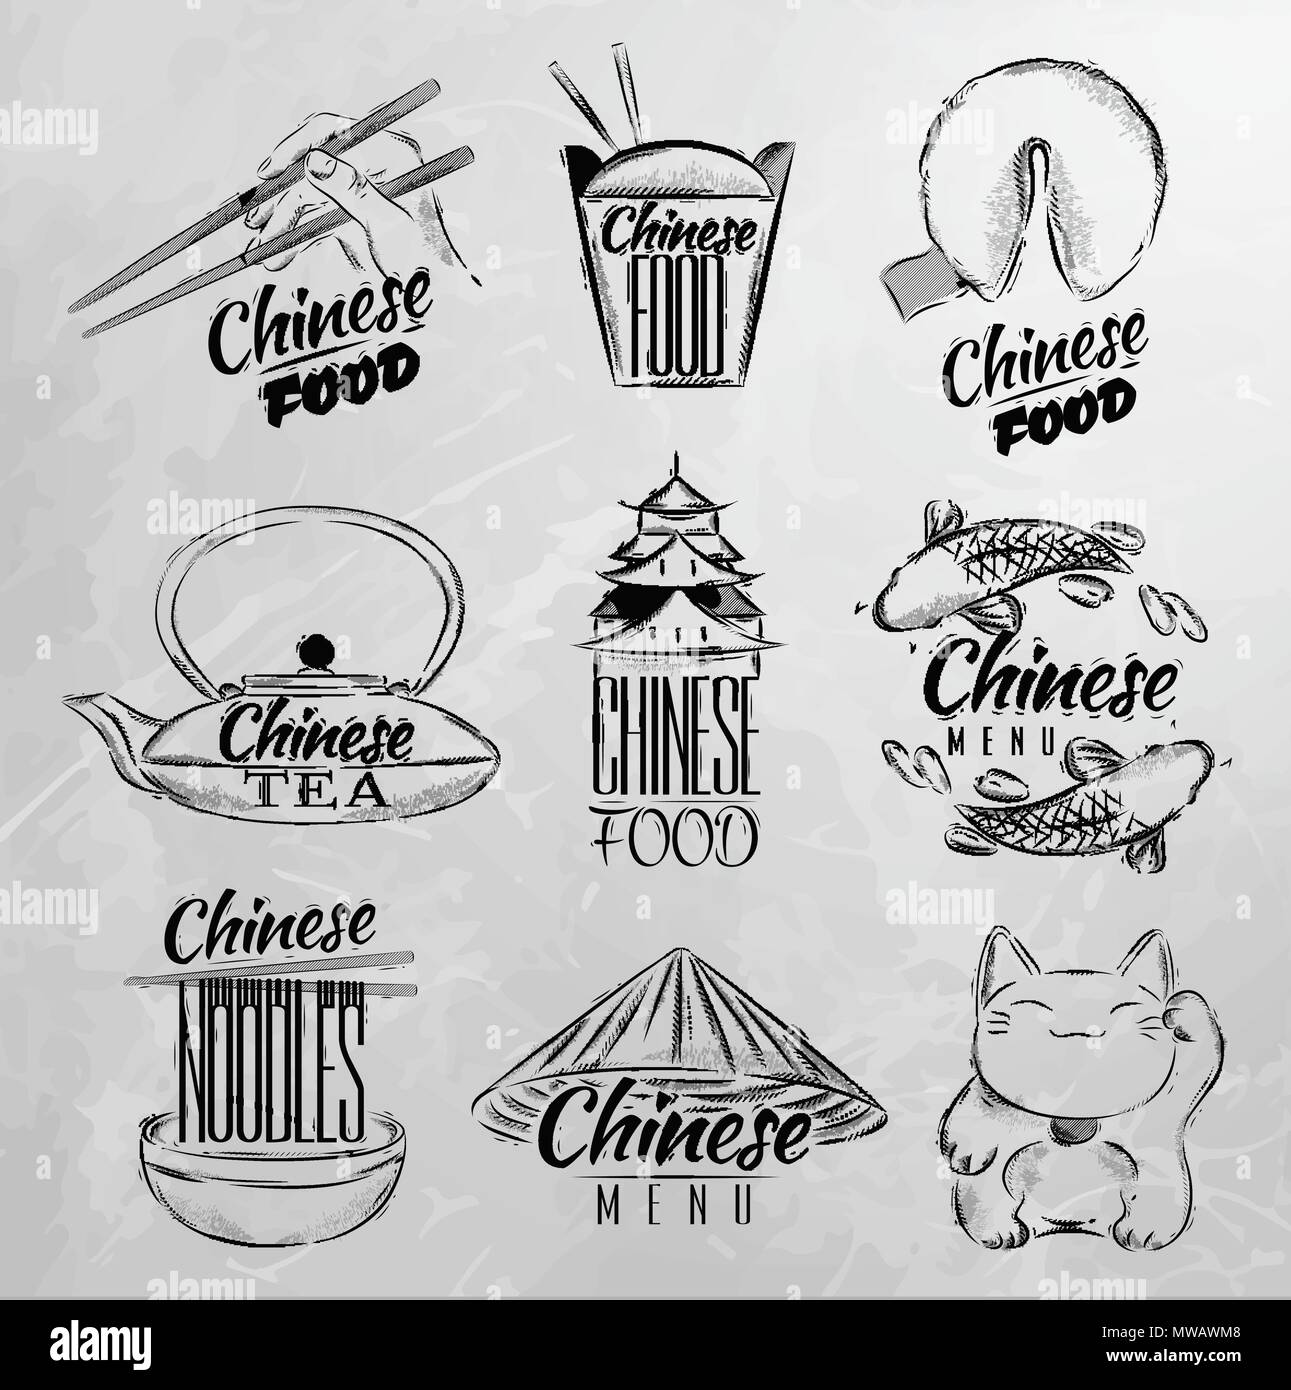 Set of symbols icons chinese food in retro style lettering chinese noodles, lucky cat, chinese tea, chopsticks, fortune cookies, chinese takeout box,  Stock Vector